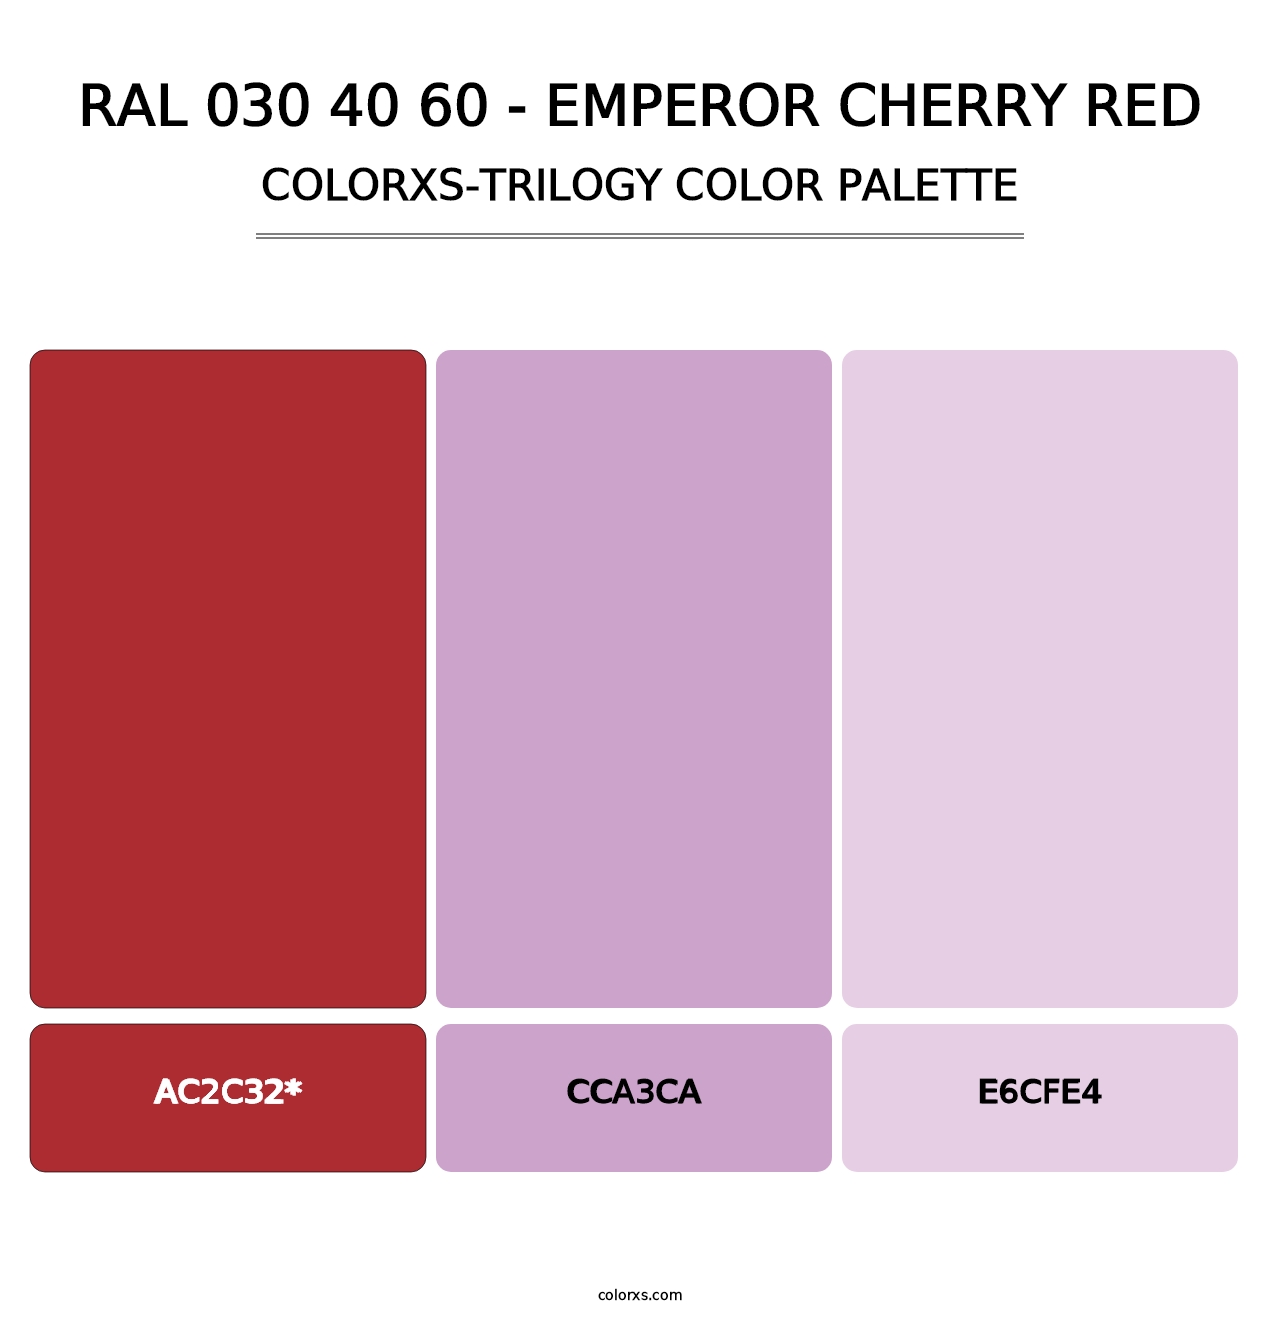 RAL 030 40 60 - Emperor Cherry Red - Colorxs Trilogy Palette